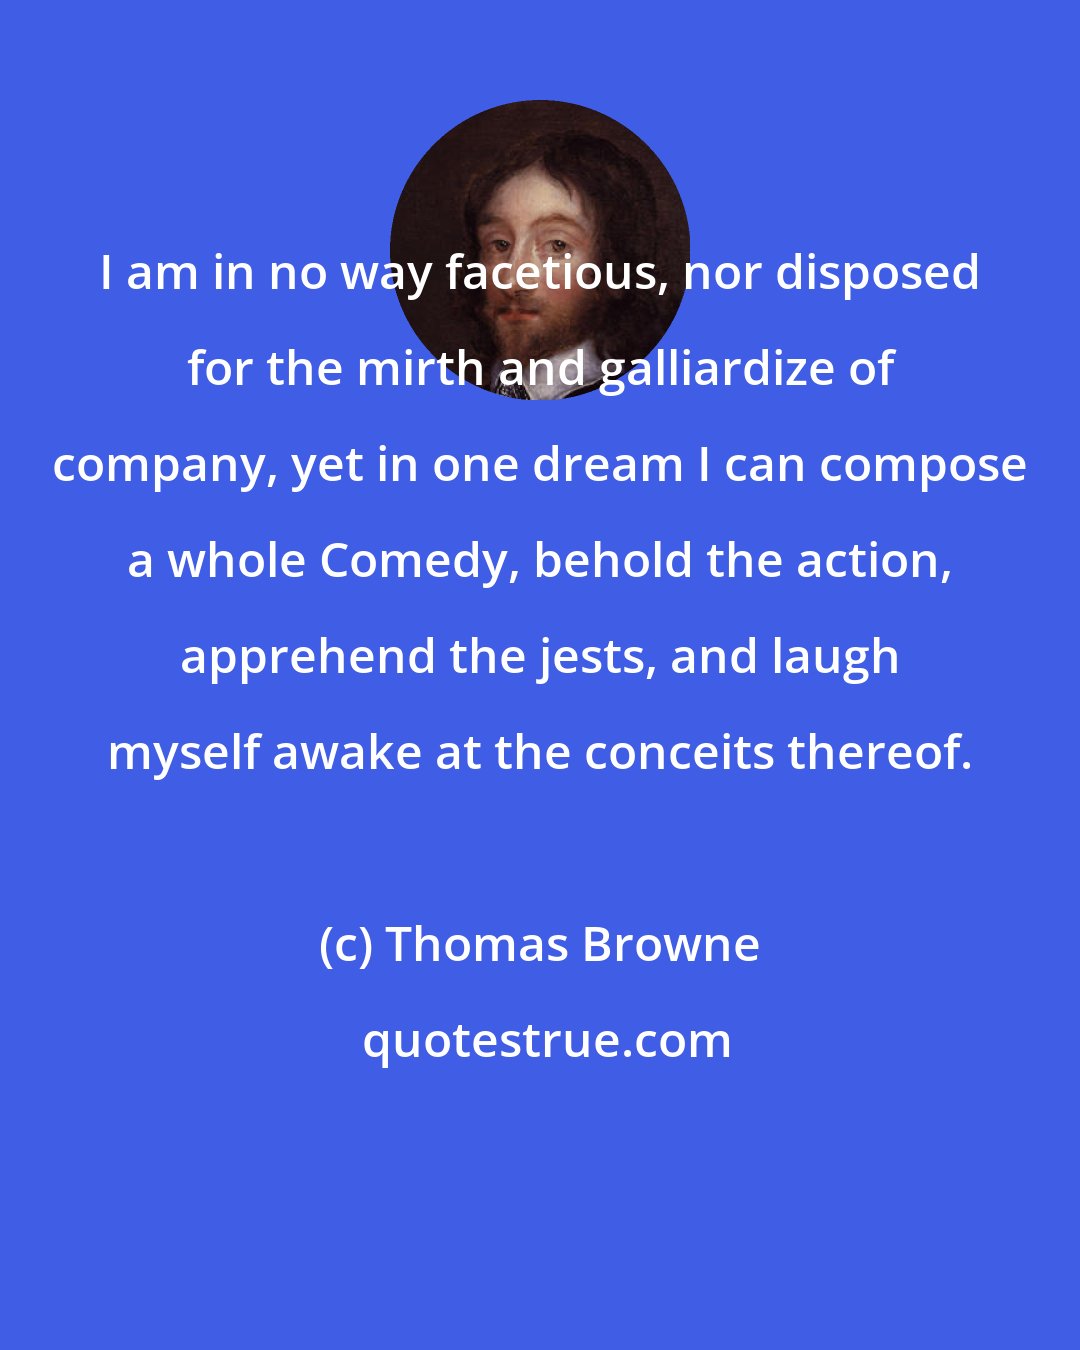 Thomas Browne: I am in no way facetious, nor disposed for the mirth and galliardize of company, yet in one dream I can compose a whole Comedy, behold the action, apprehend the jests, and laugh myself awake at the conceits thereof.